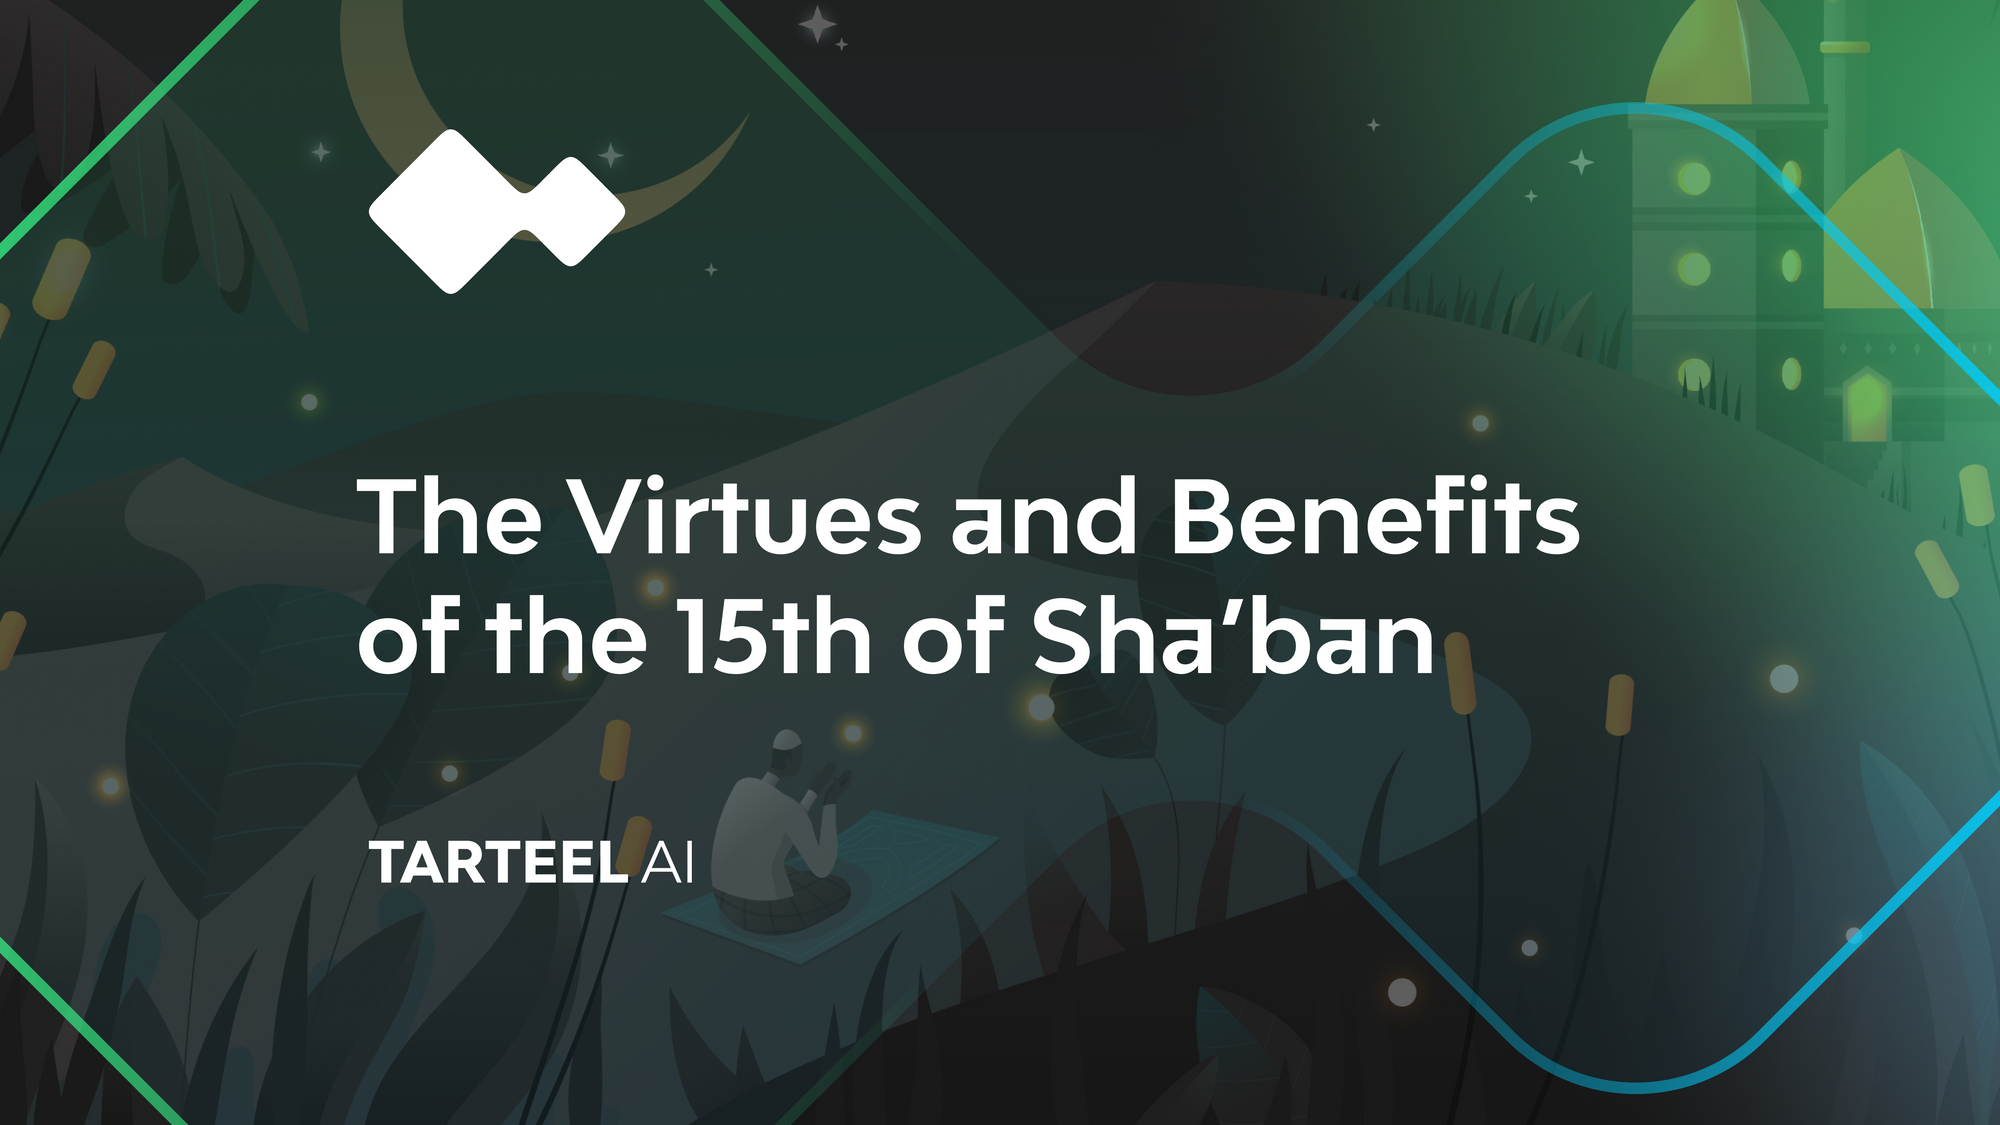 The Virtues and Benefits of the 15th of Sha’ban